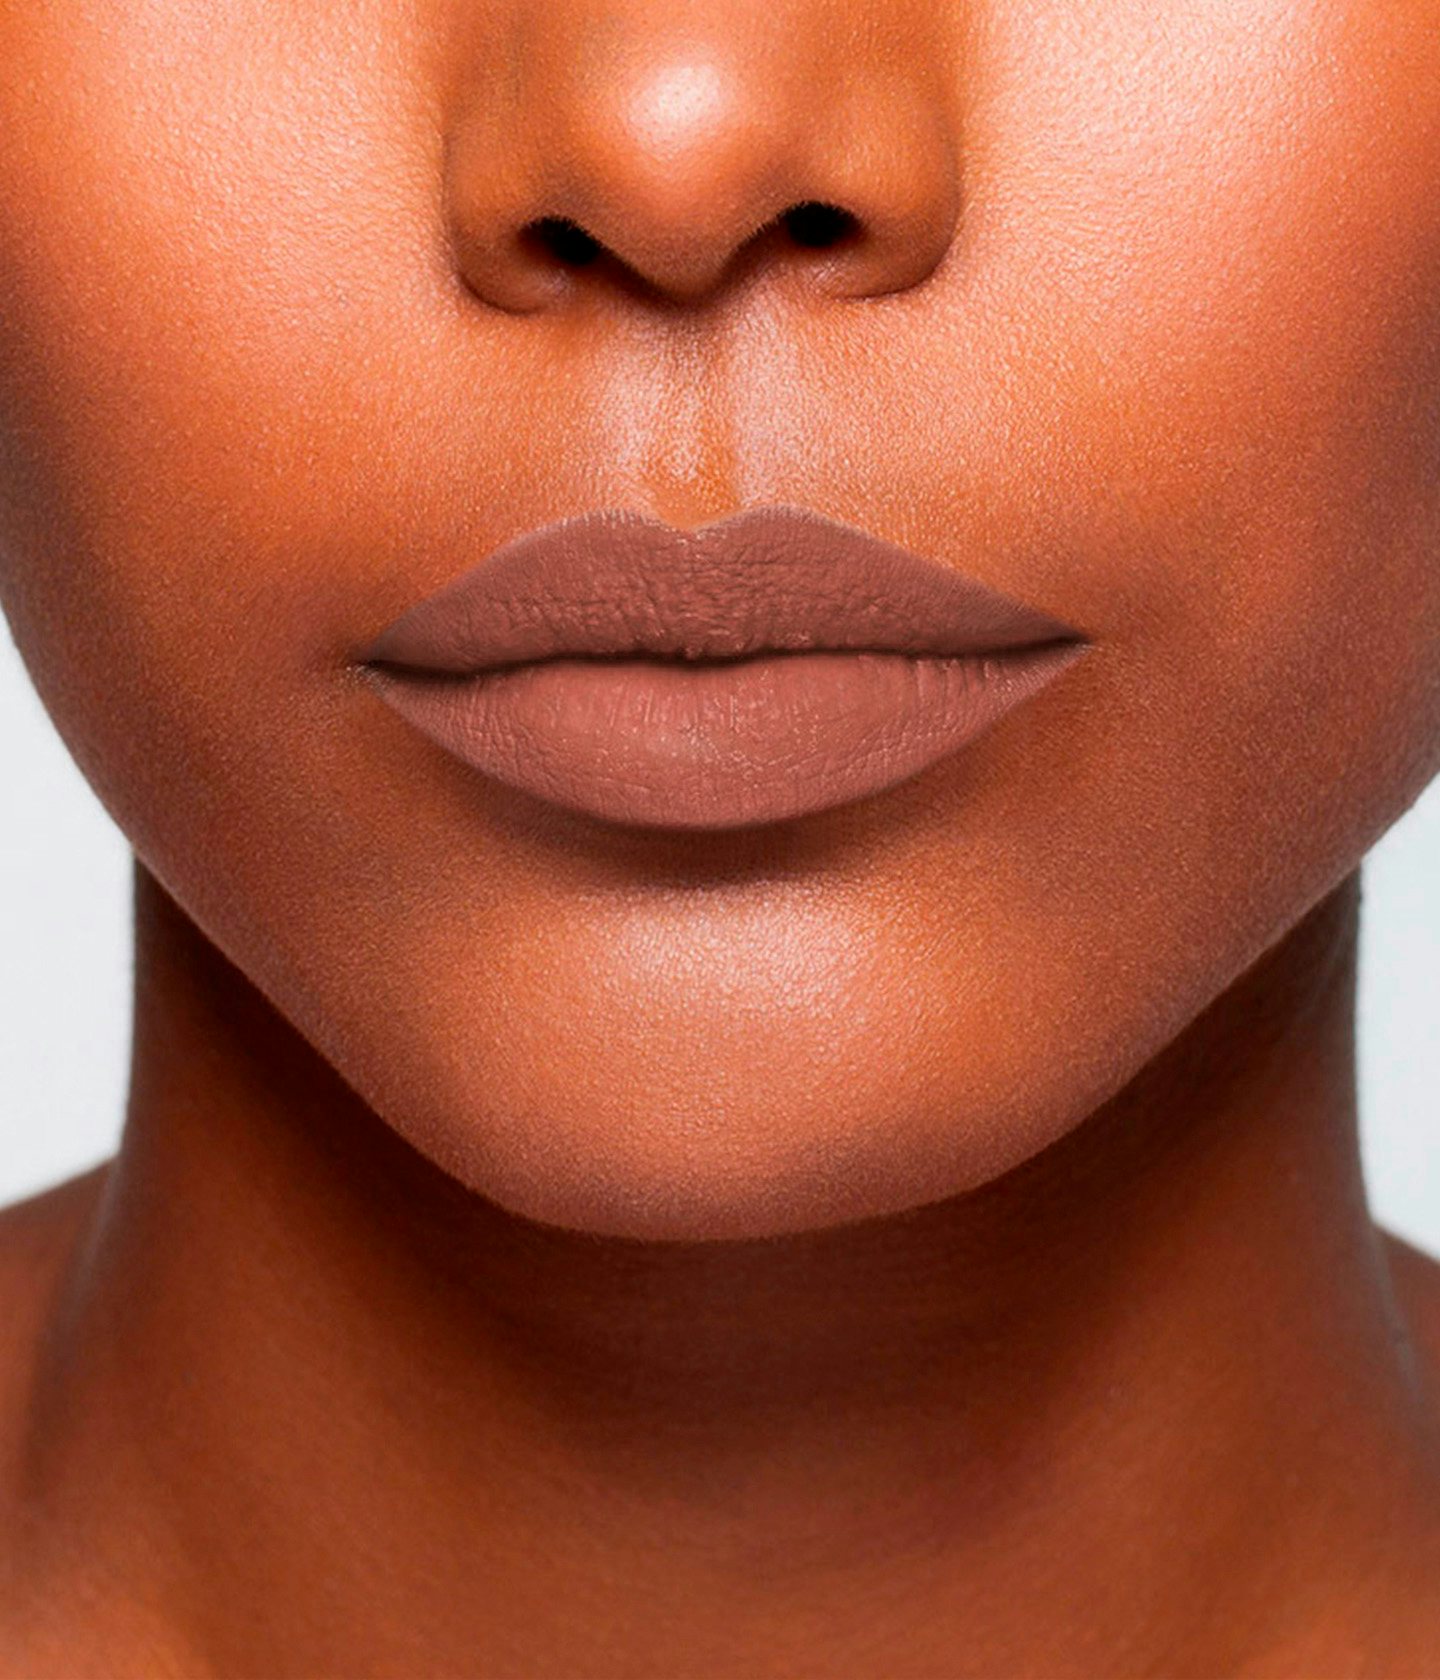 La bouche rouge Le Nude Monceau lipstick shade on the lips of a dark skin model